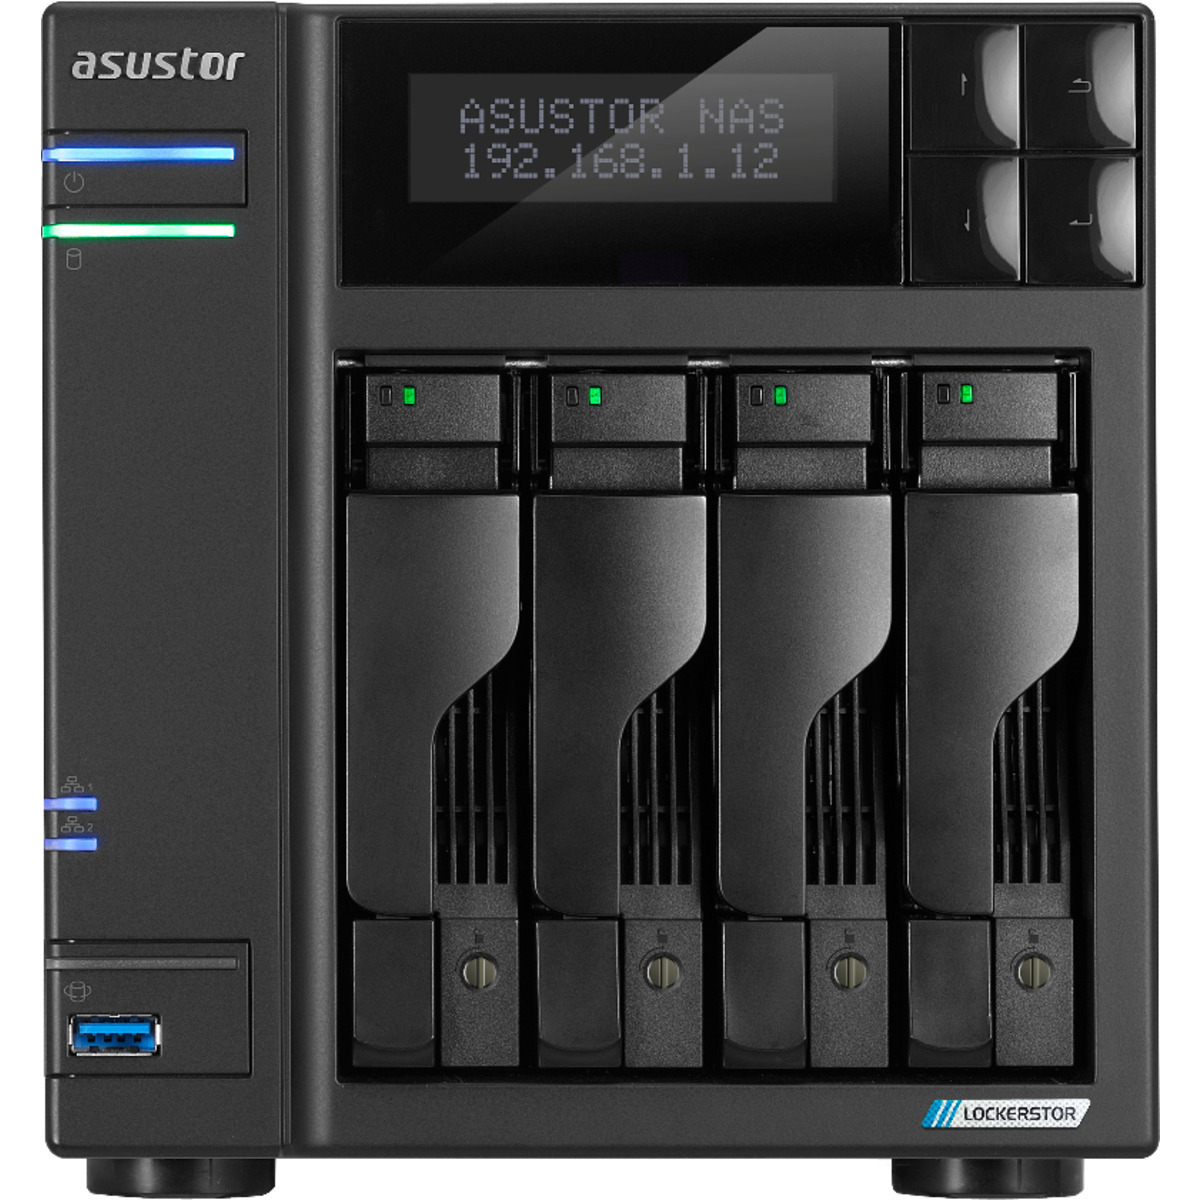 ASUSTOR LOCKERSTOR 4 Gen2 AS6704T 56tb 4-Bay Desktop Multimedia / Power User / Business NAS - Network Attached Storage Device 4x14tb Seagate IronWolf Pro ST14000NT001 3.5 7200rpm SATA 6Gb/s HDD NAS Class Drives Installed - Burn-In Tested - FREE RAM UPGRADE LOCKERSTOR 4 Gen2 AS6704T